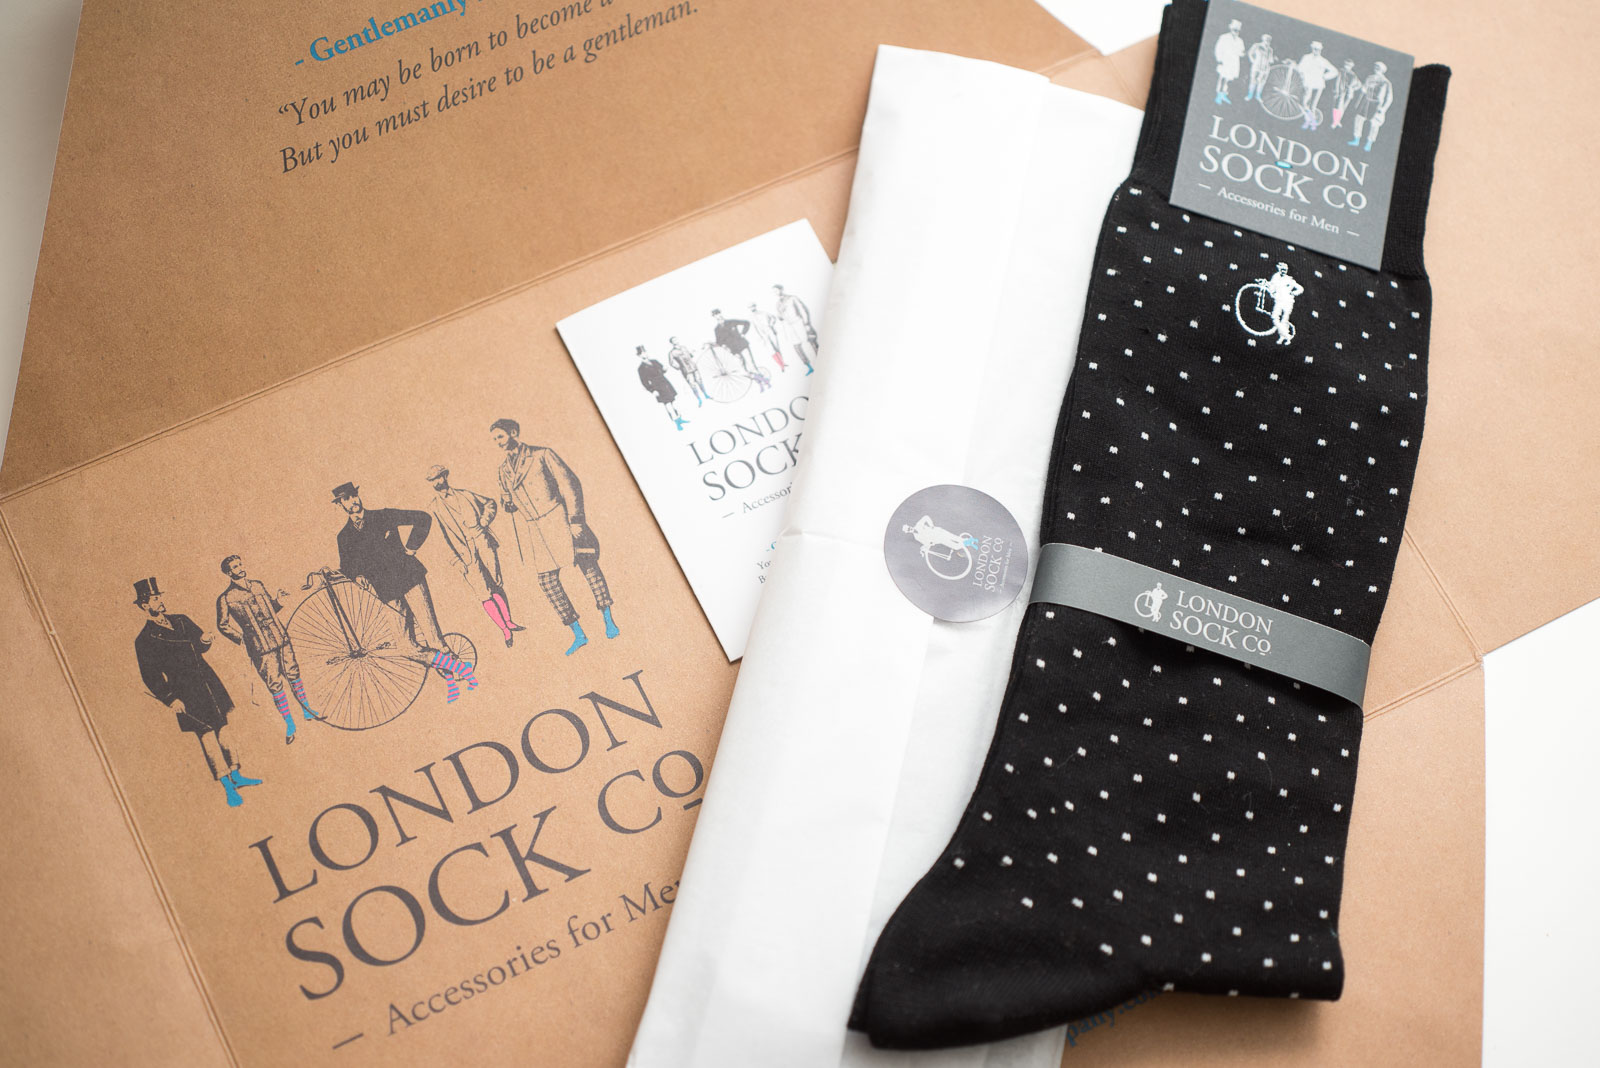 Subscription Sock Club from £10 per month